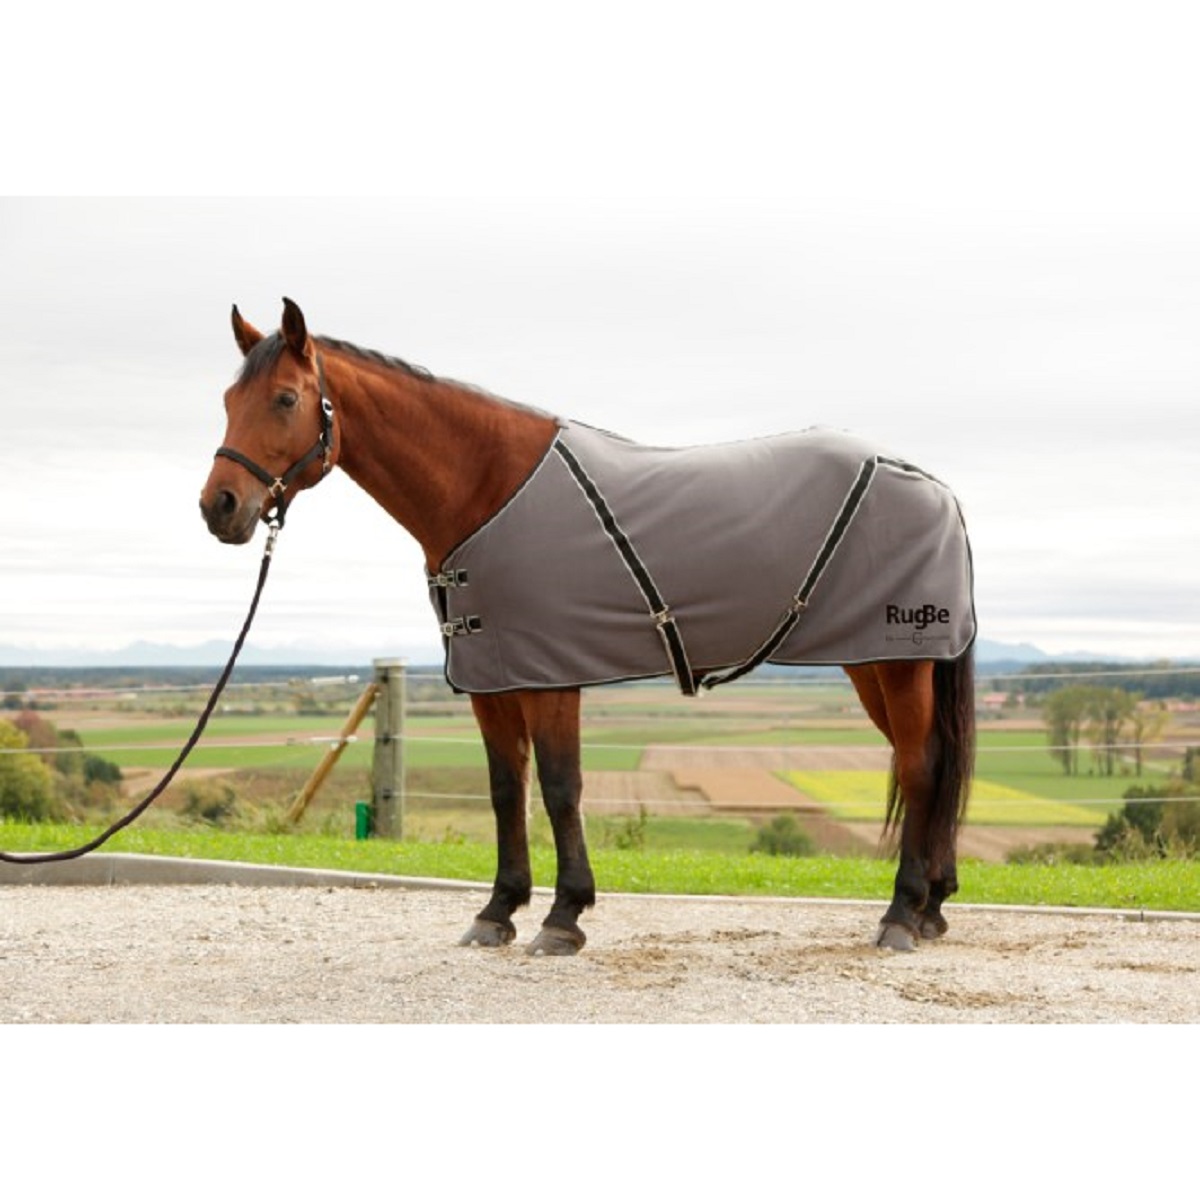 RugBe Classic Cooler Rug anthracite / black